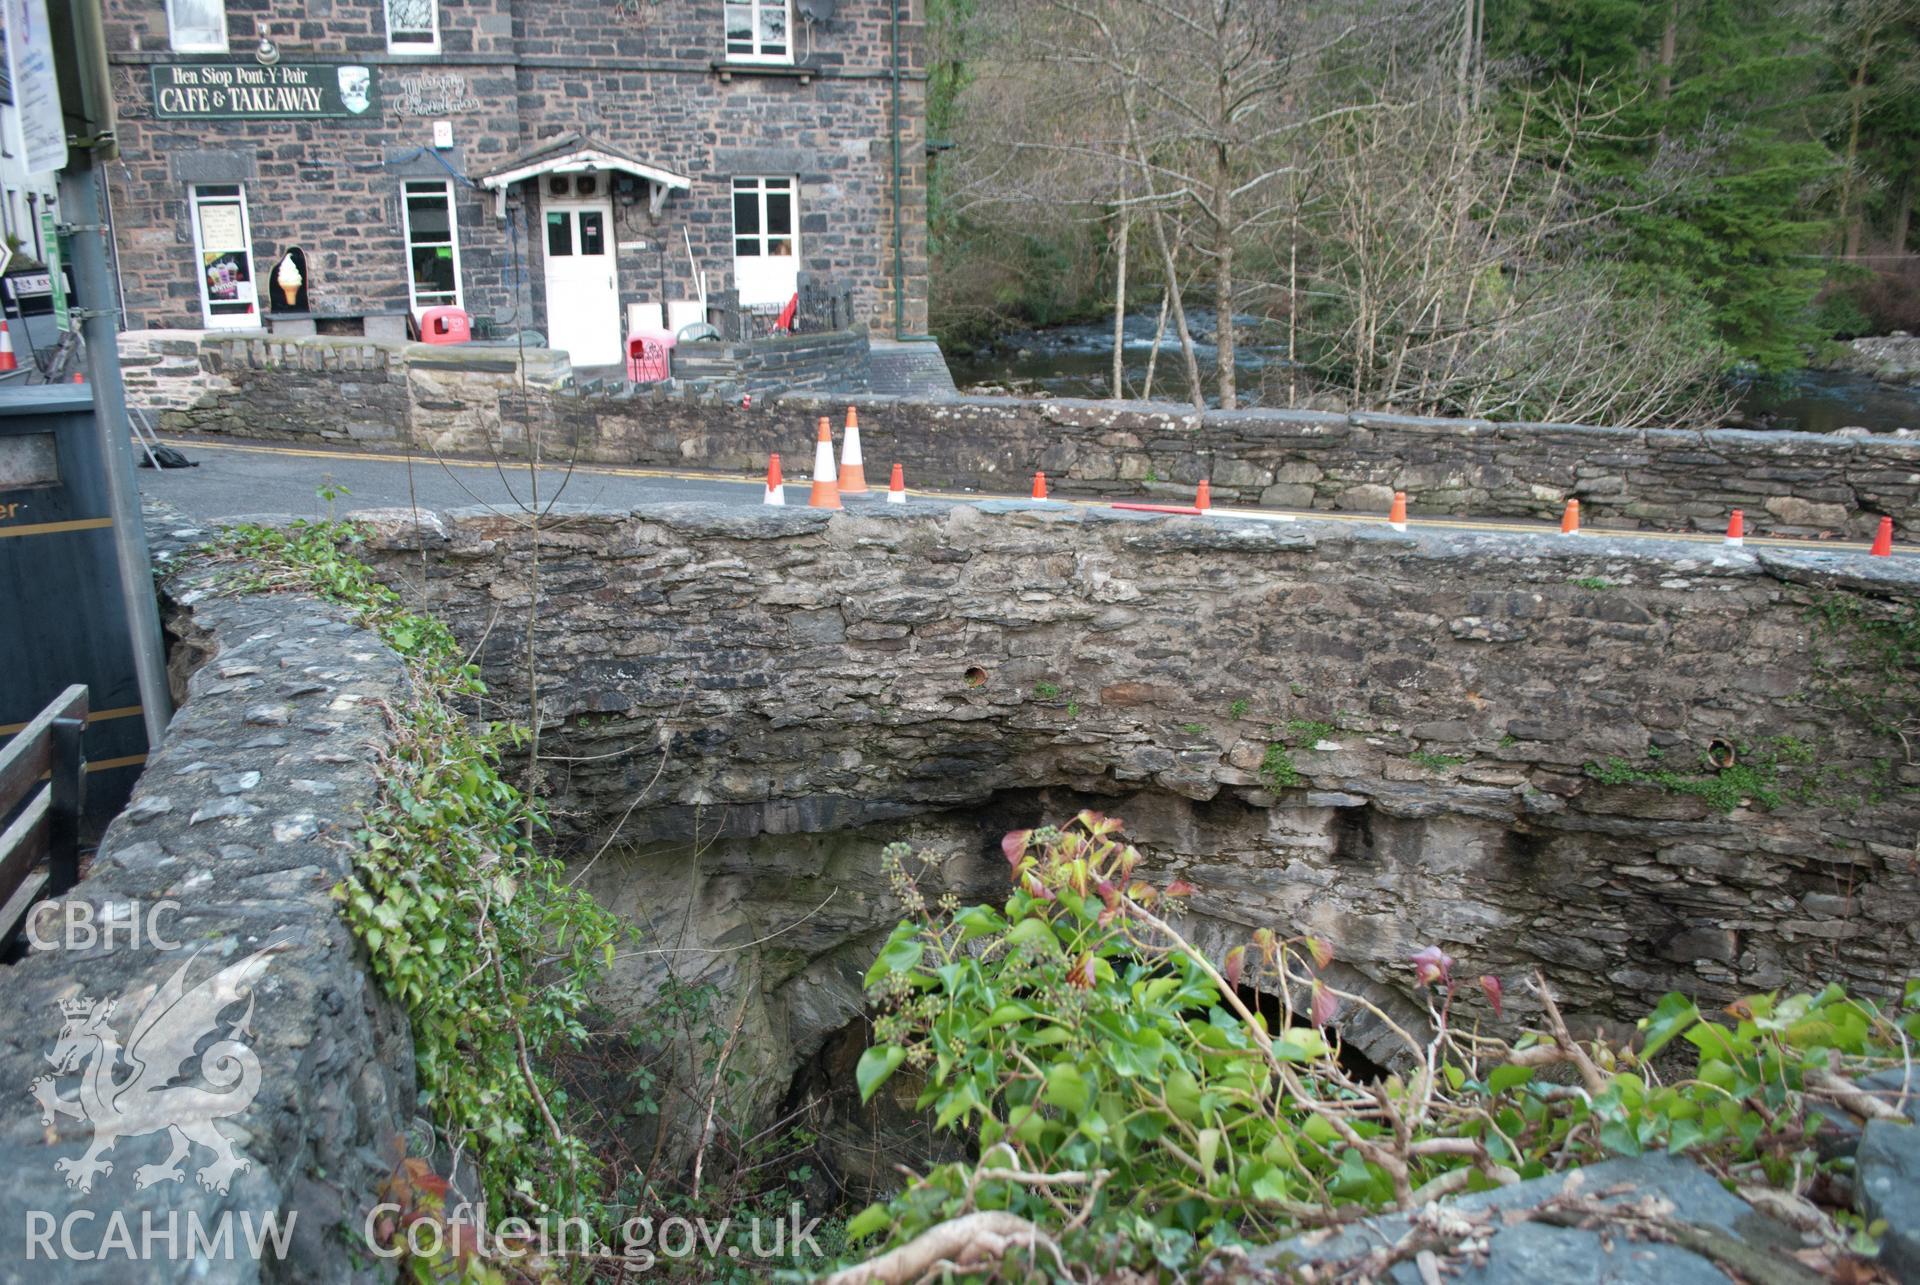 View from the south east of external (riverside) of the parapet walling in the southeast corner of the bridge. Digital photograph taken for Archaeological Watching Brief at Pont y Pair, Betws y Coed, 2019. Gwynedd Archaeological Trust Project ref G2587.